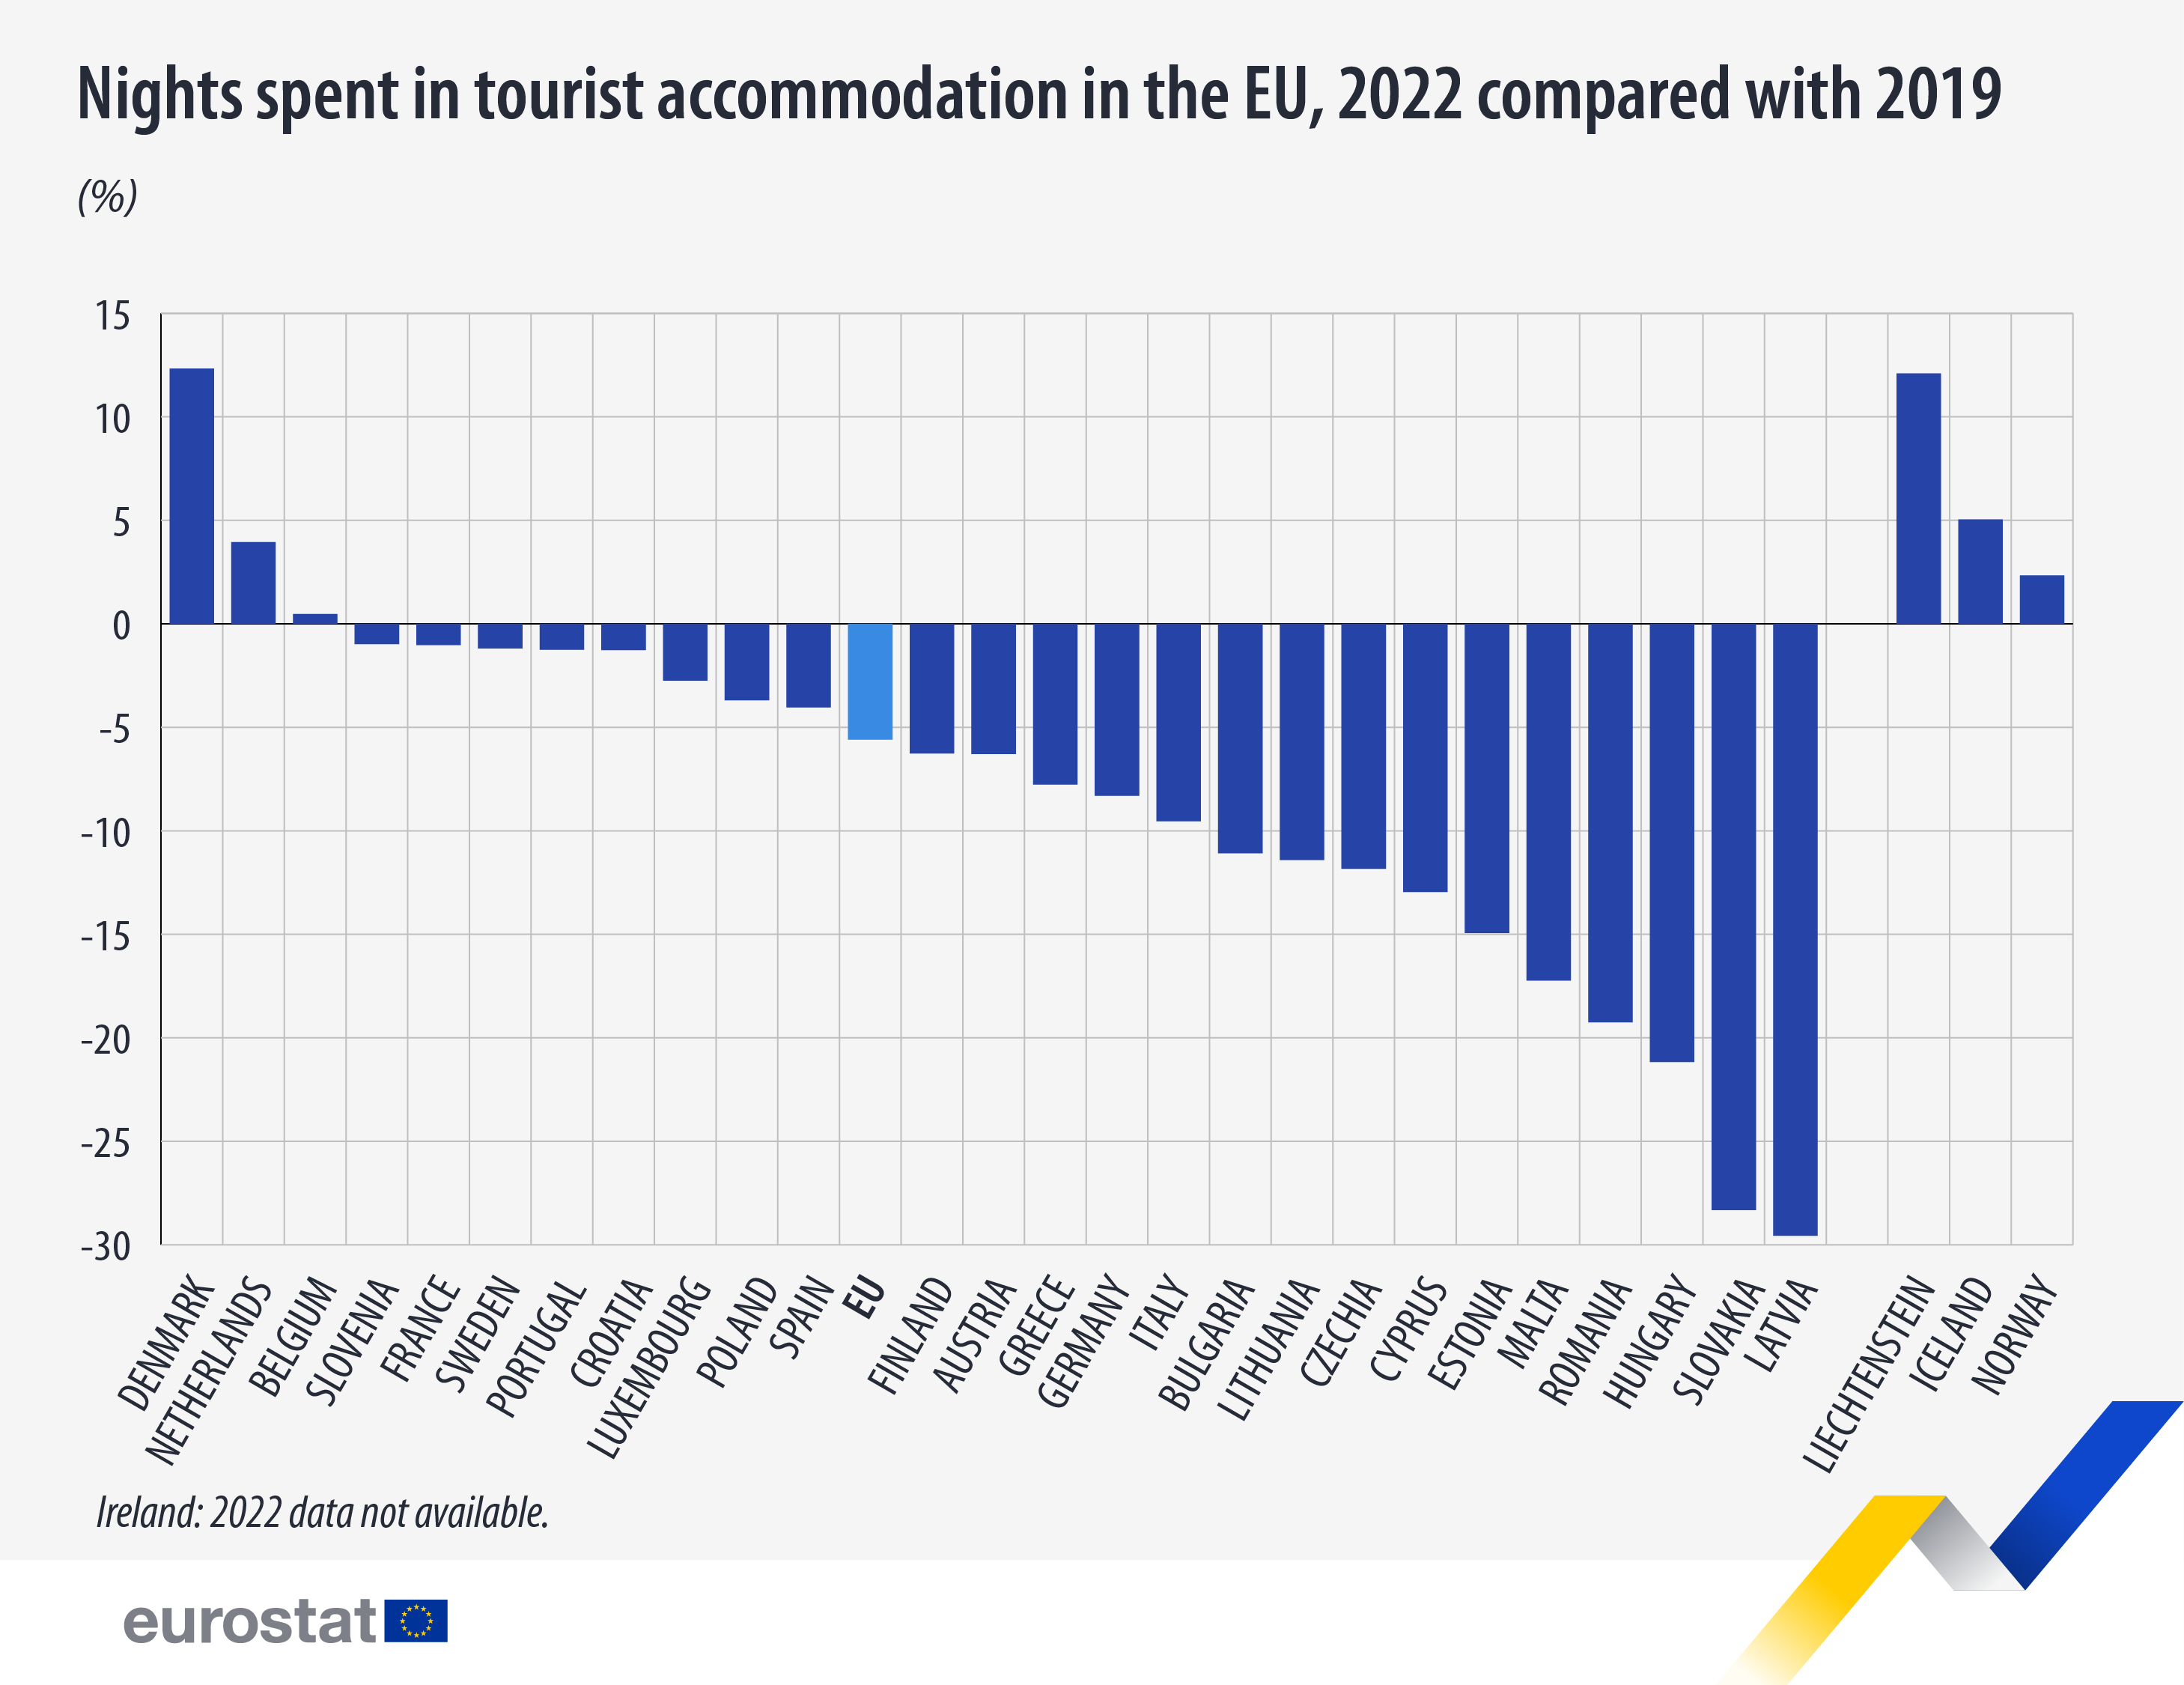 Bar graph: Nights in tourist accommodation in the EU, 2022 compared to 2019 in %